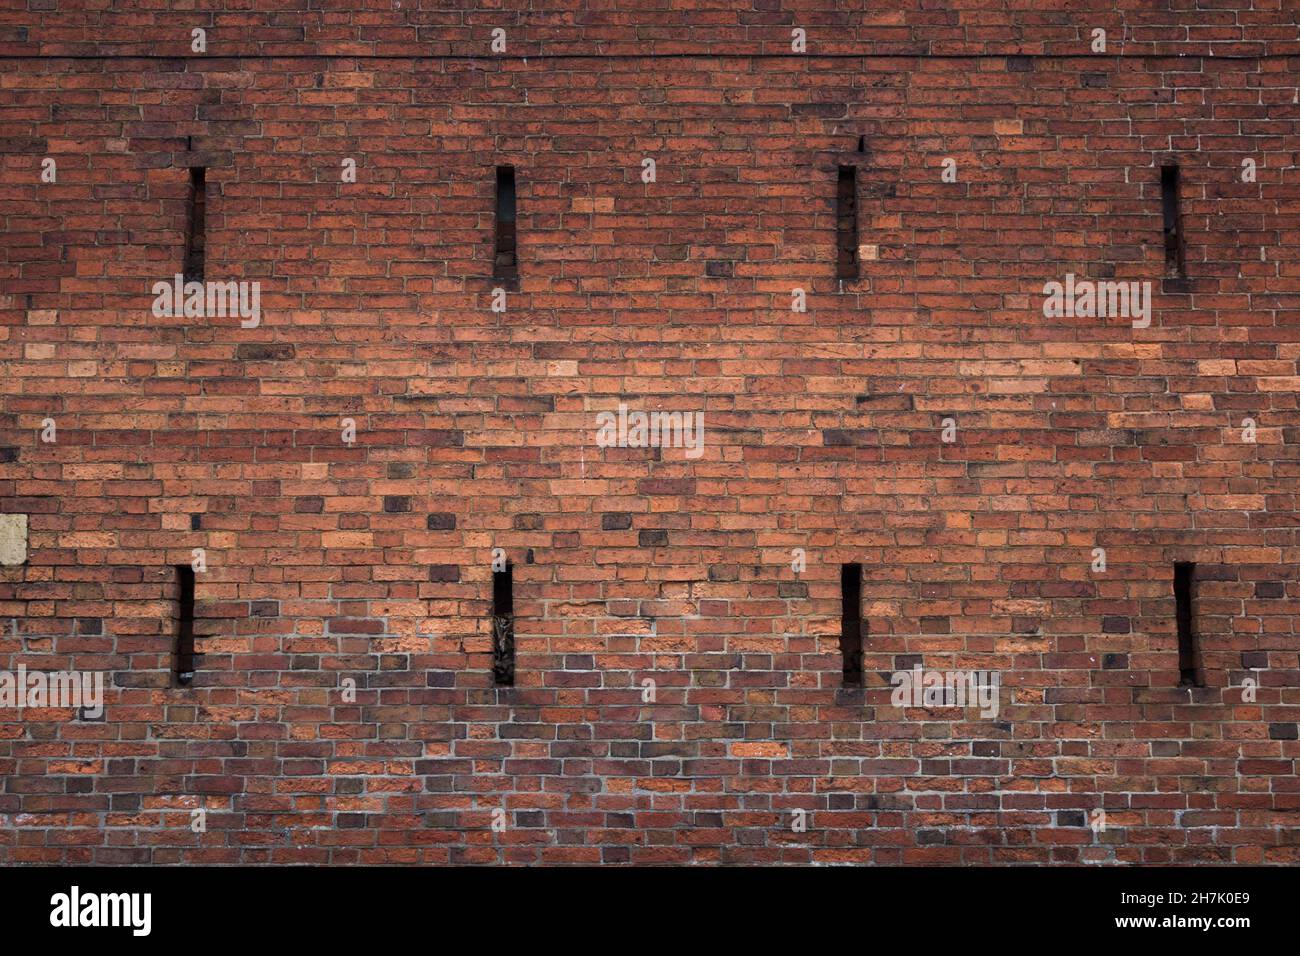 Abstract, Red Brick Building, Brick Exterior, Weeping Windows Stock Photo